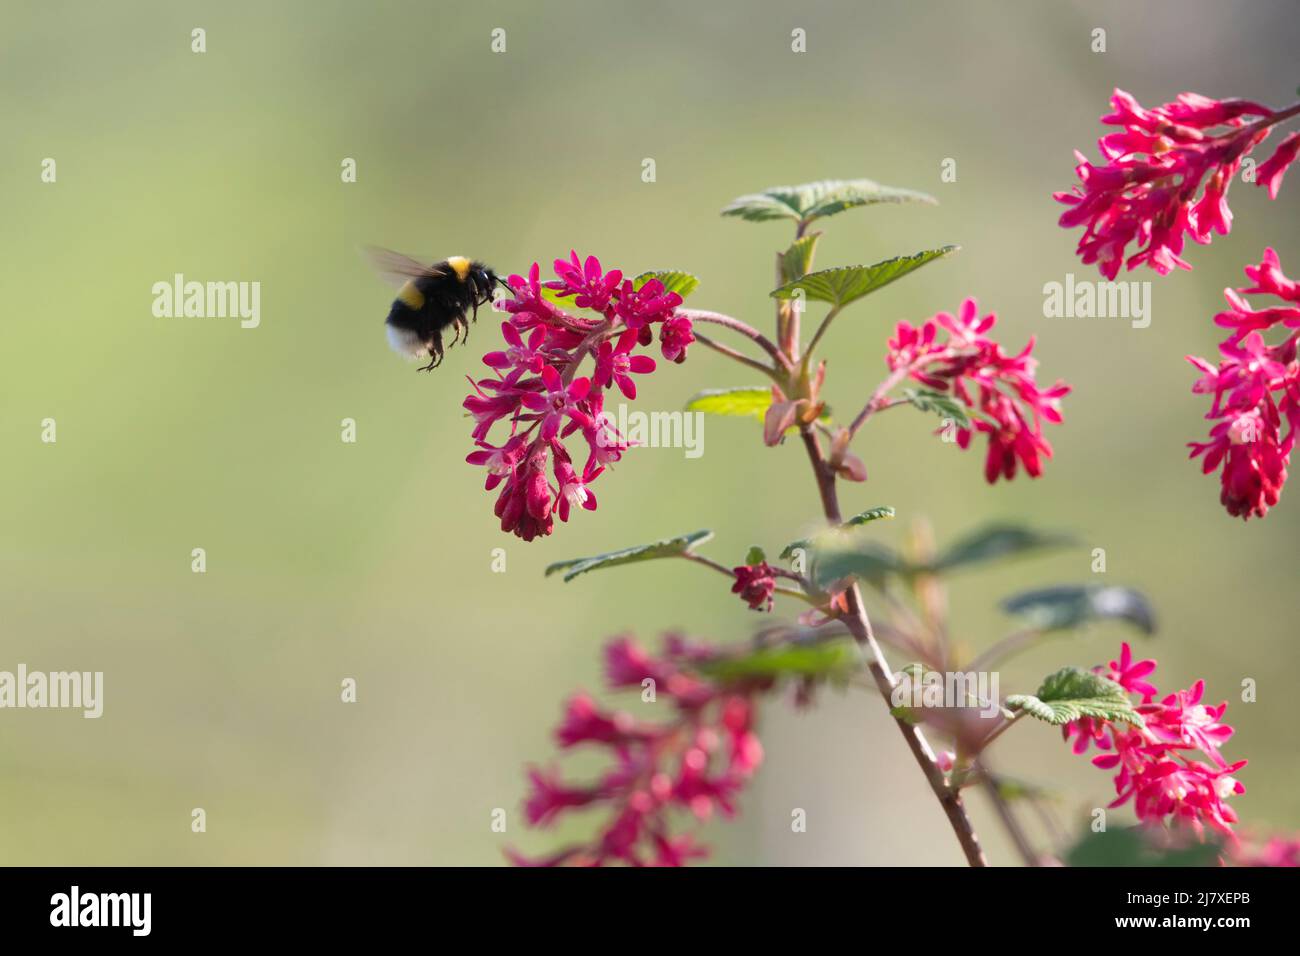 A White-Tailed Bumblebee (Bombus Lucorum) in Flight Approaching the Crimson Flowers on a Flowering Currant (Ribes Sanguineum) Stock Photo